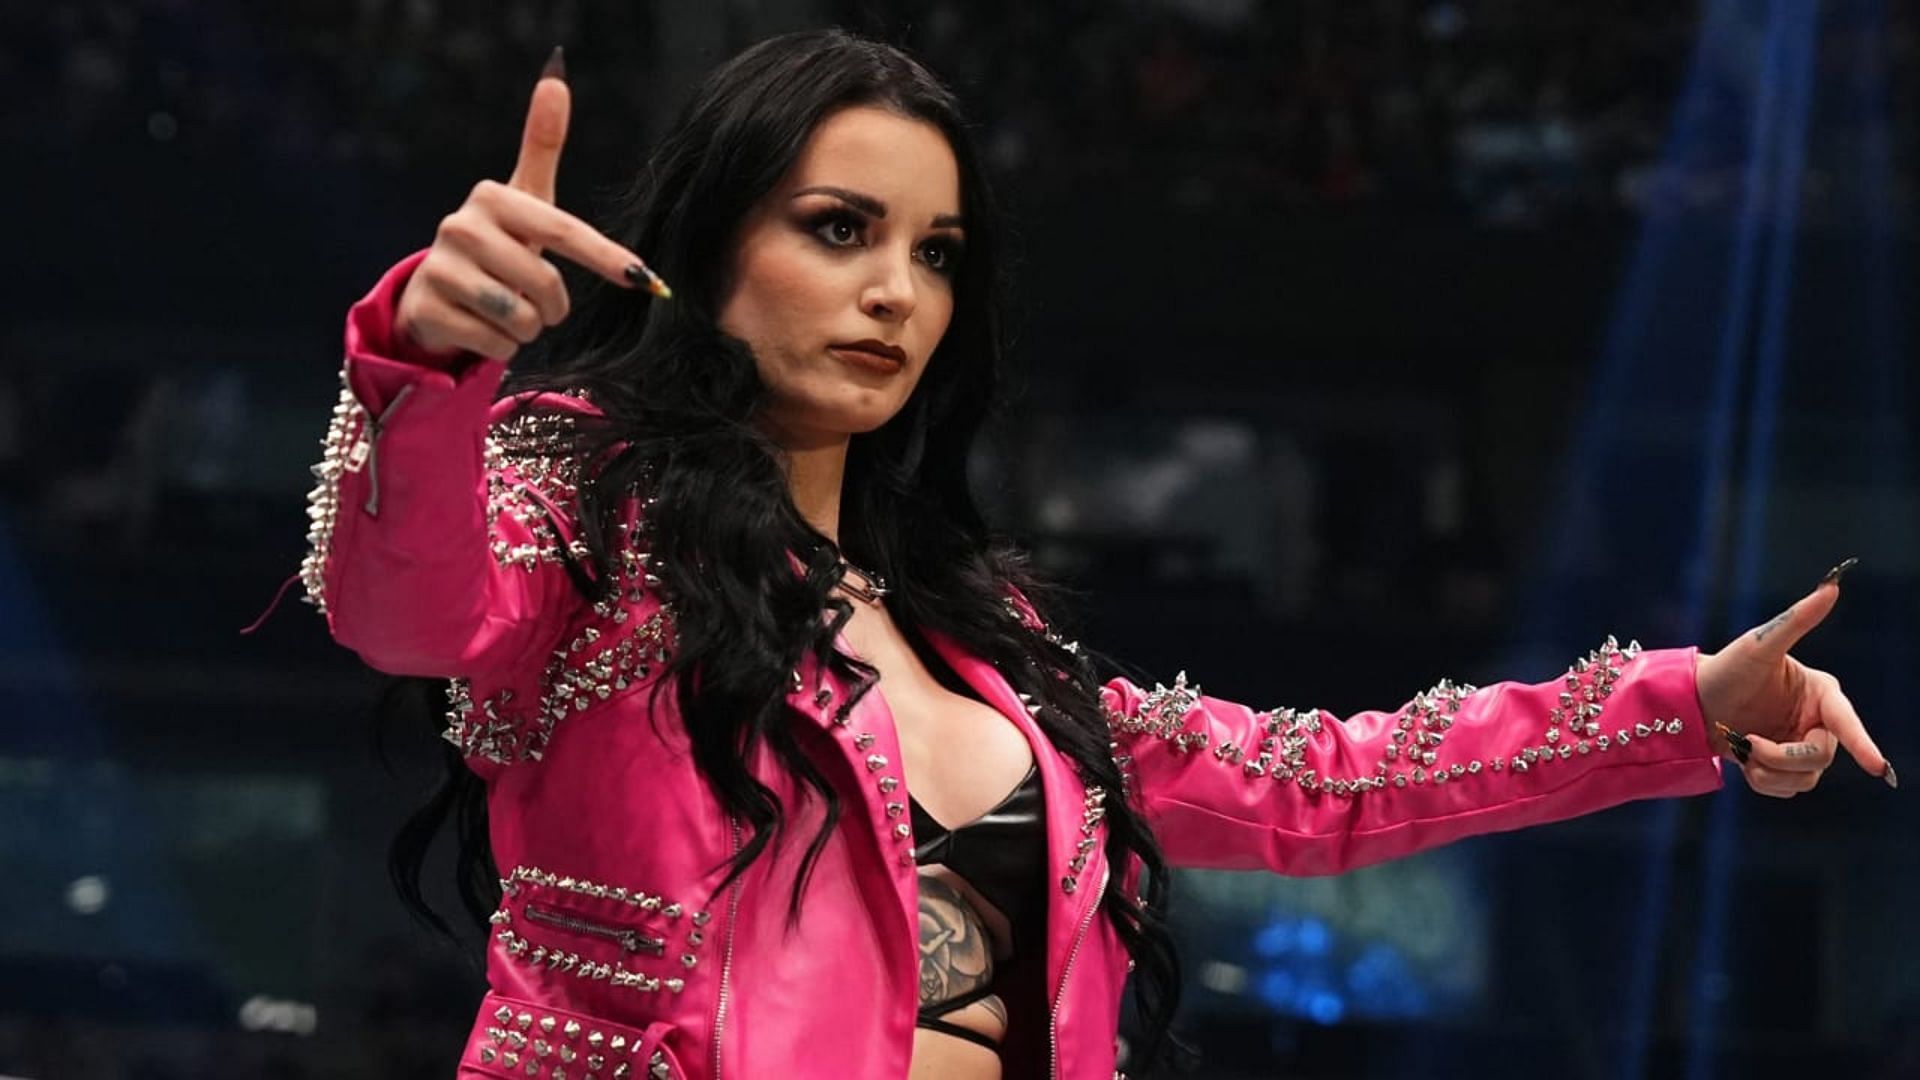 Saraya is a superstar currently signed with AEW